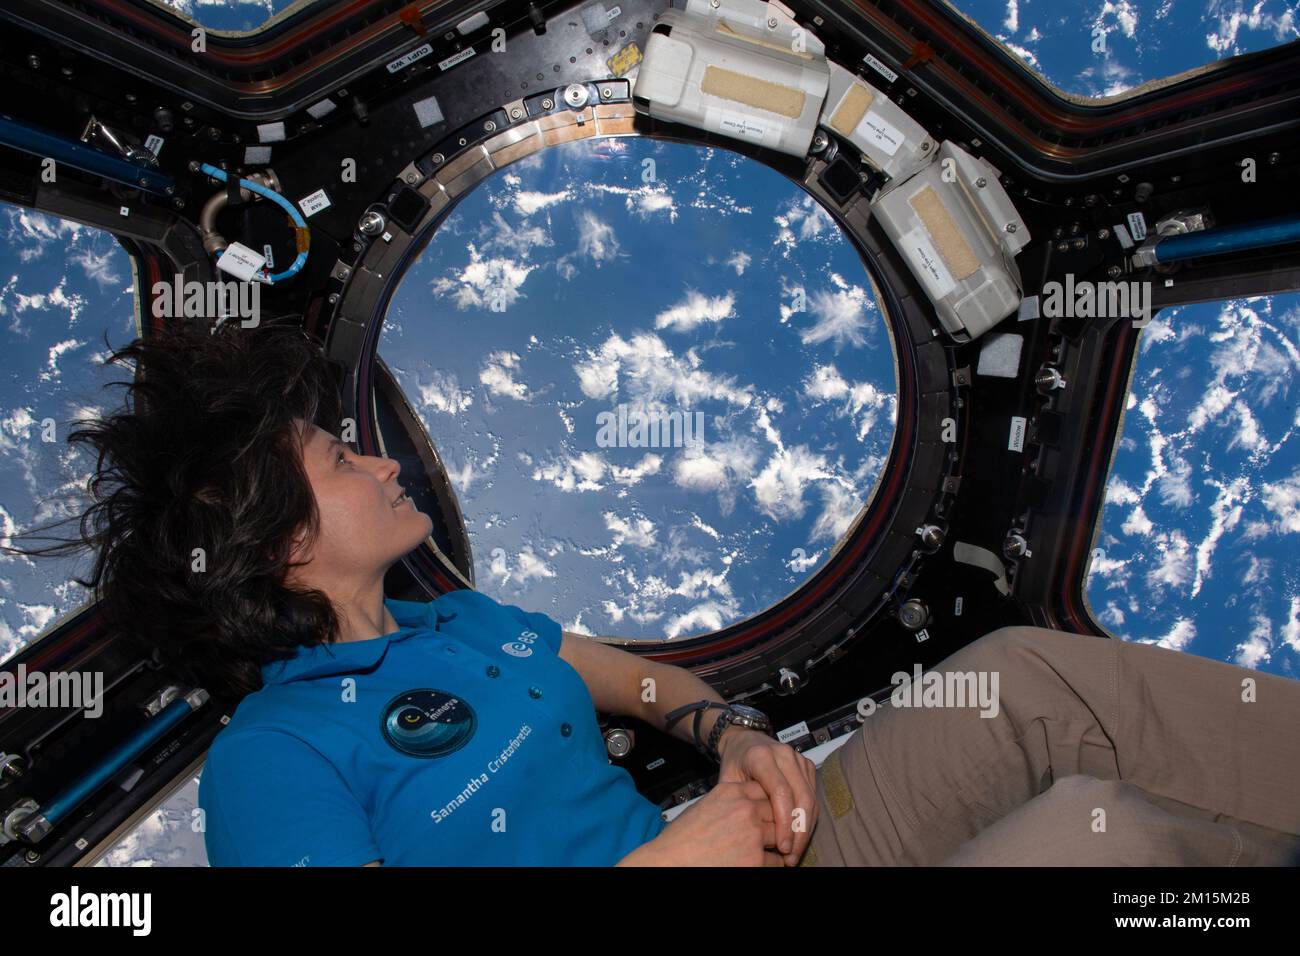 ISS - 01 October 2022 - ESA (European Space Agency) astronaut and Expedition 68 Flight Engineer Samantha Cristoforetti looks at the Earth below throug Stock Photo